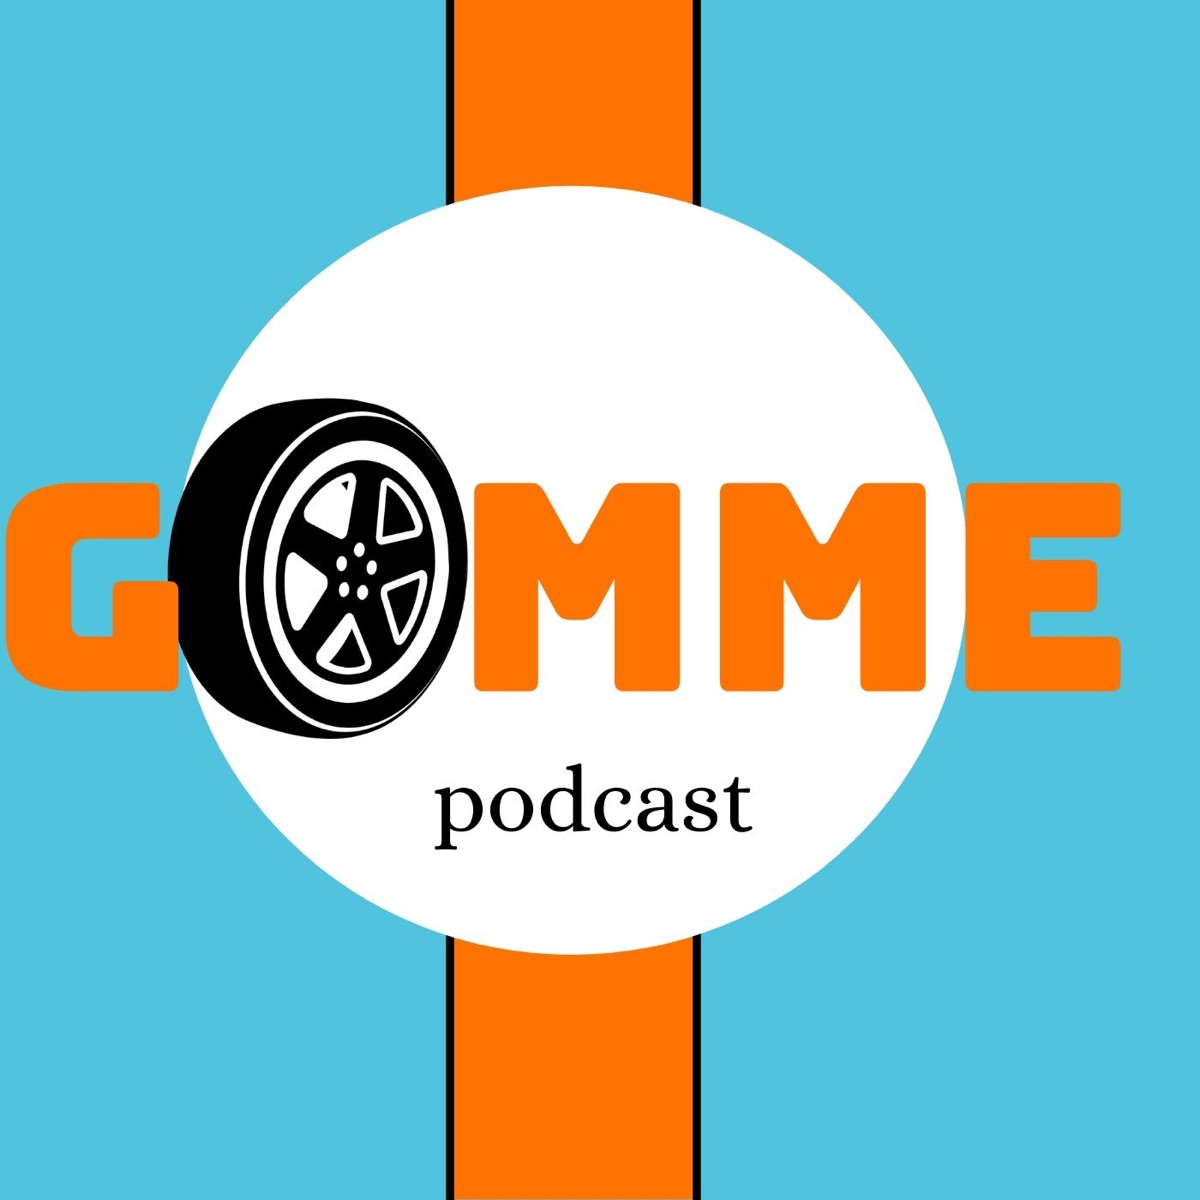 Gomme – Podcast Immagine